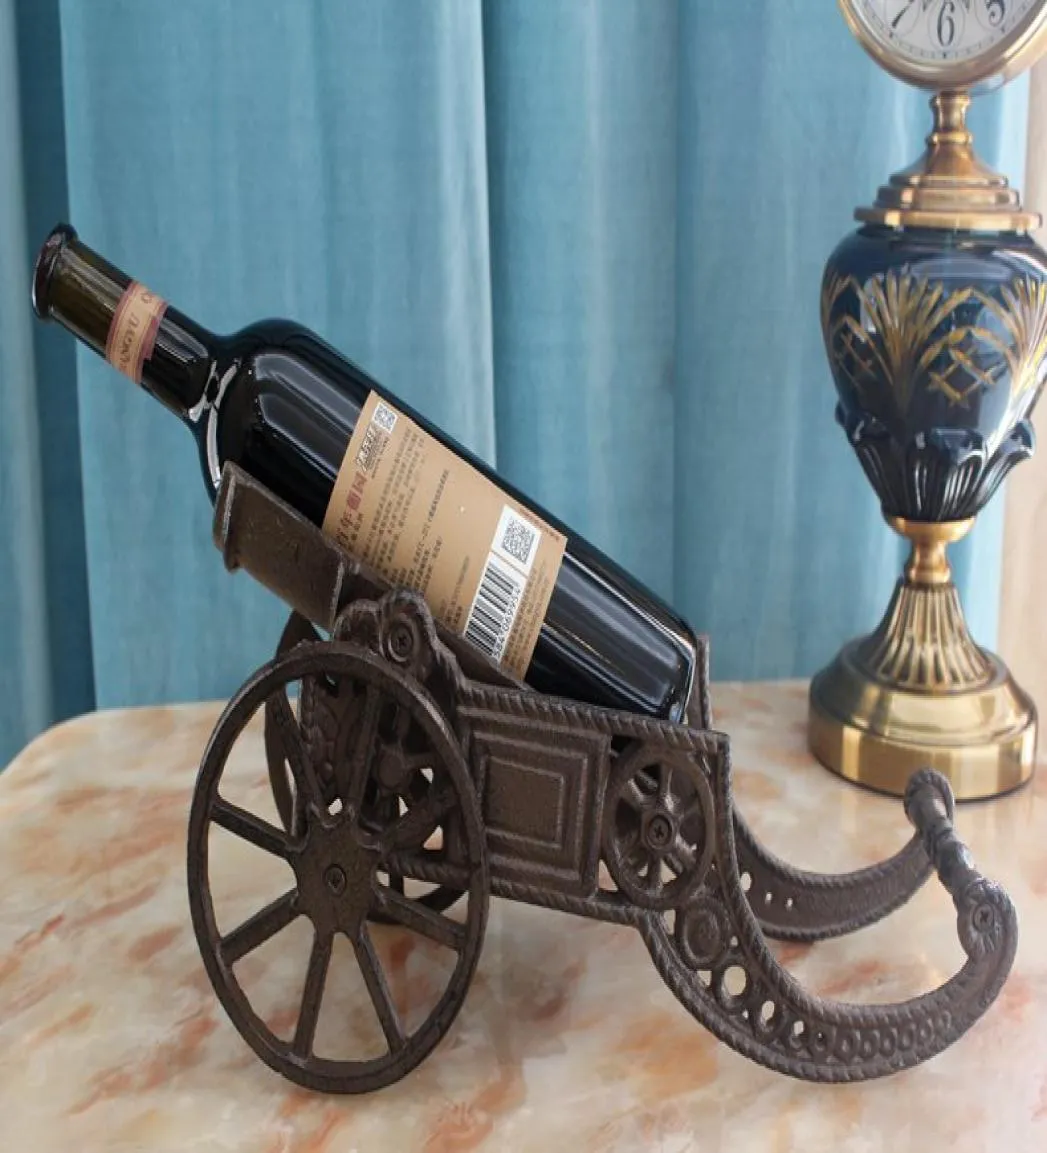 Cast Iron Cannon Shape Wine Bottle Stand Stand cozinha de mesa de mesa de mesa de mesa de mesa de mesa de mesa de mesa de barra de mesa de mesa Vintage Ornament2467458